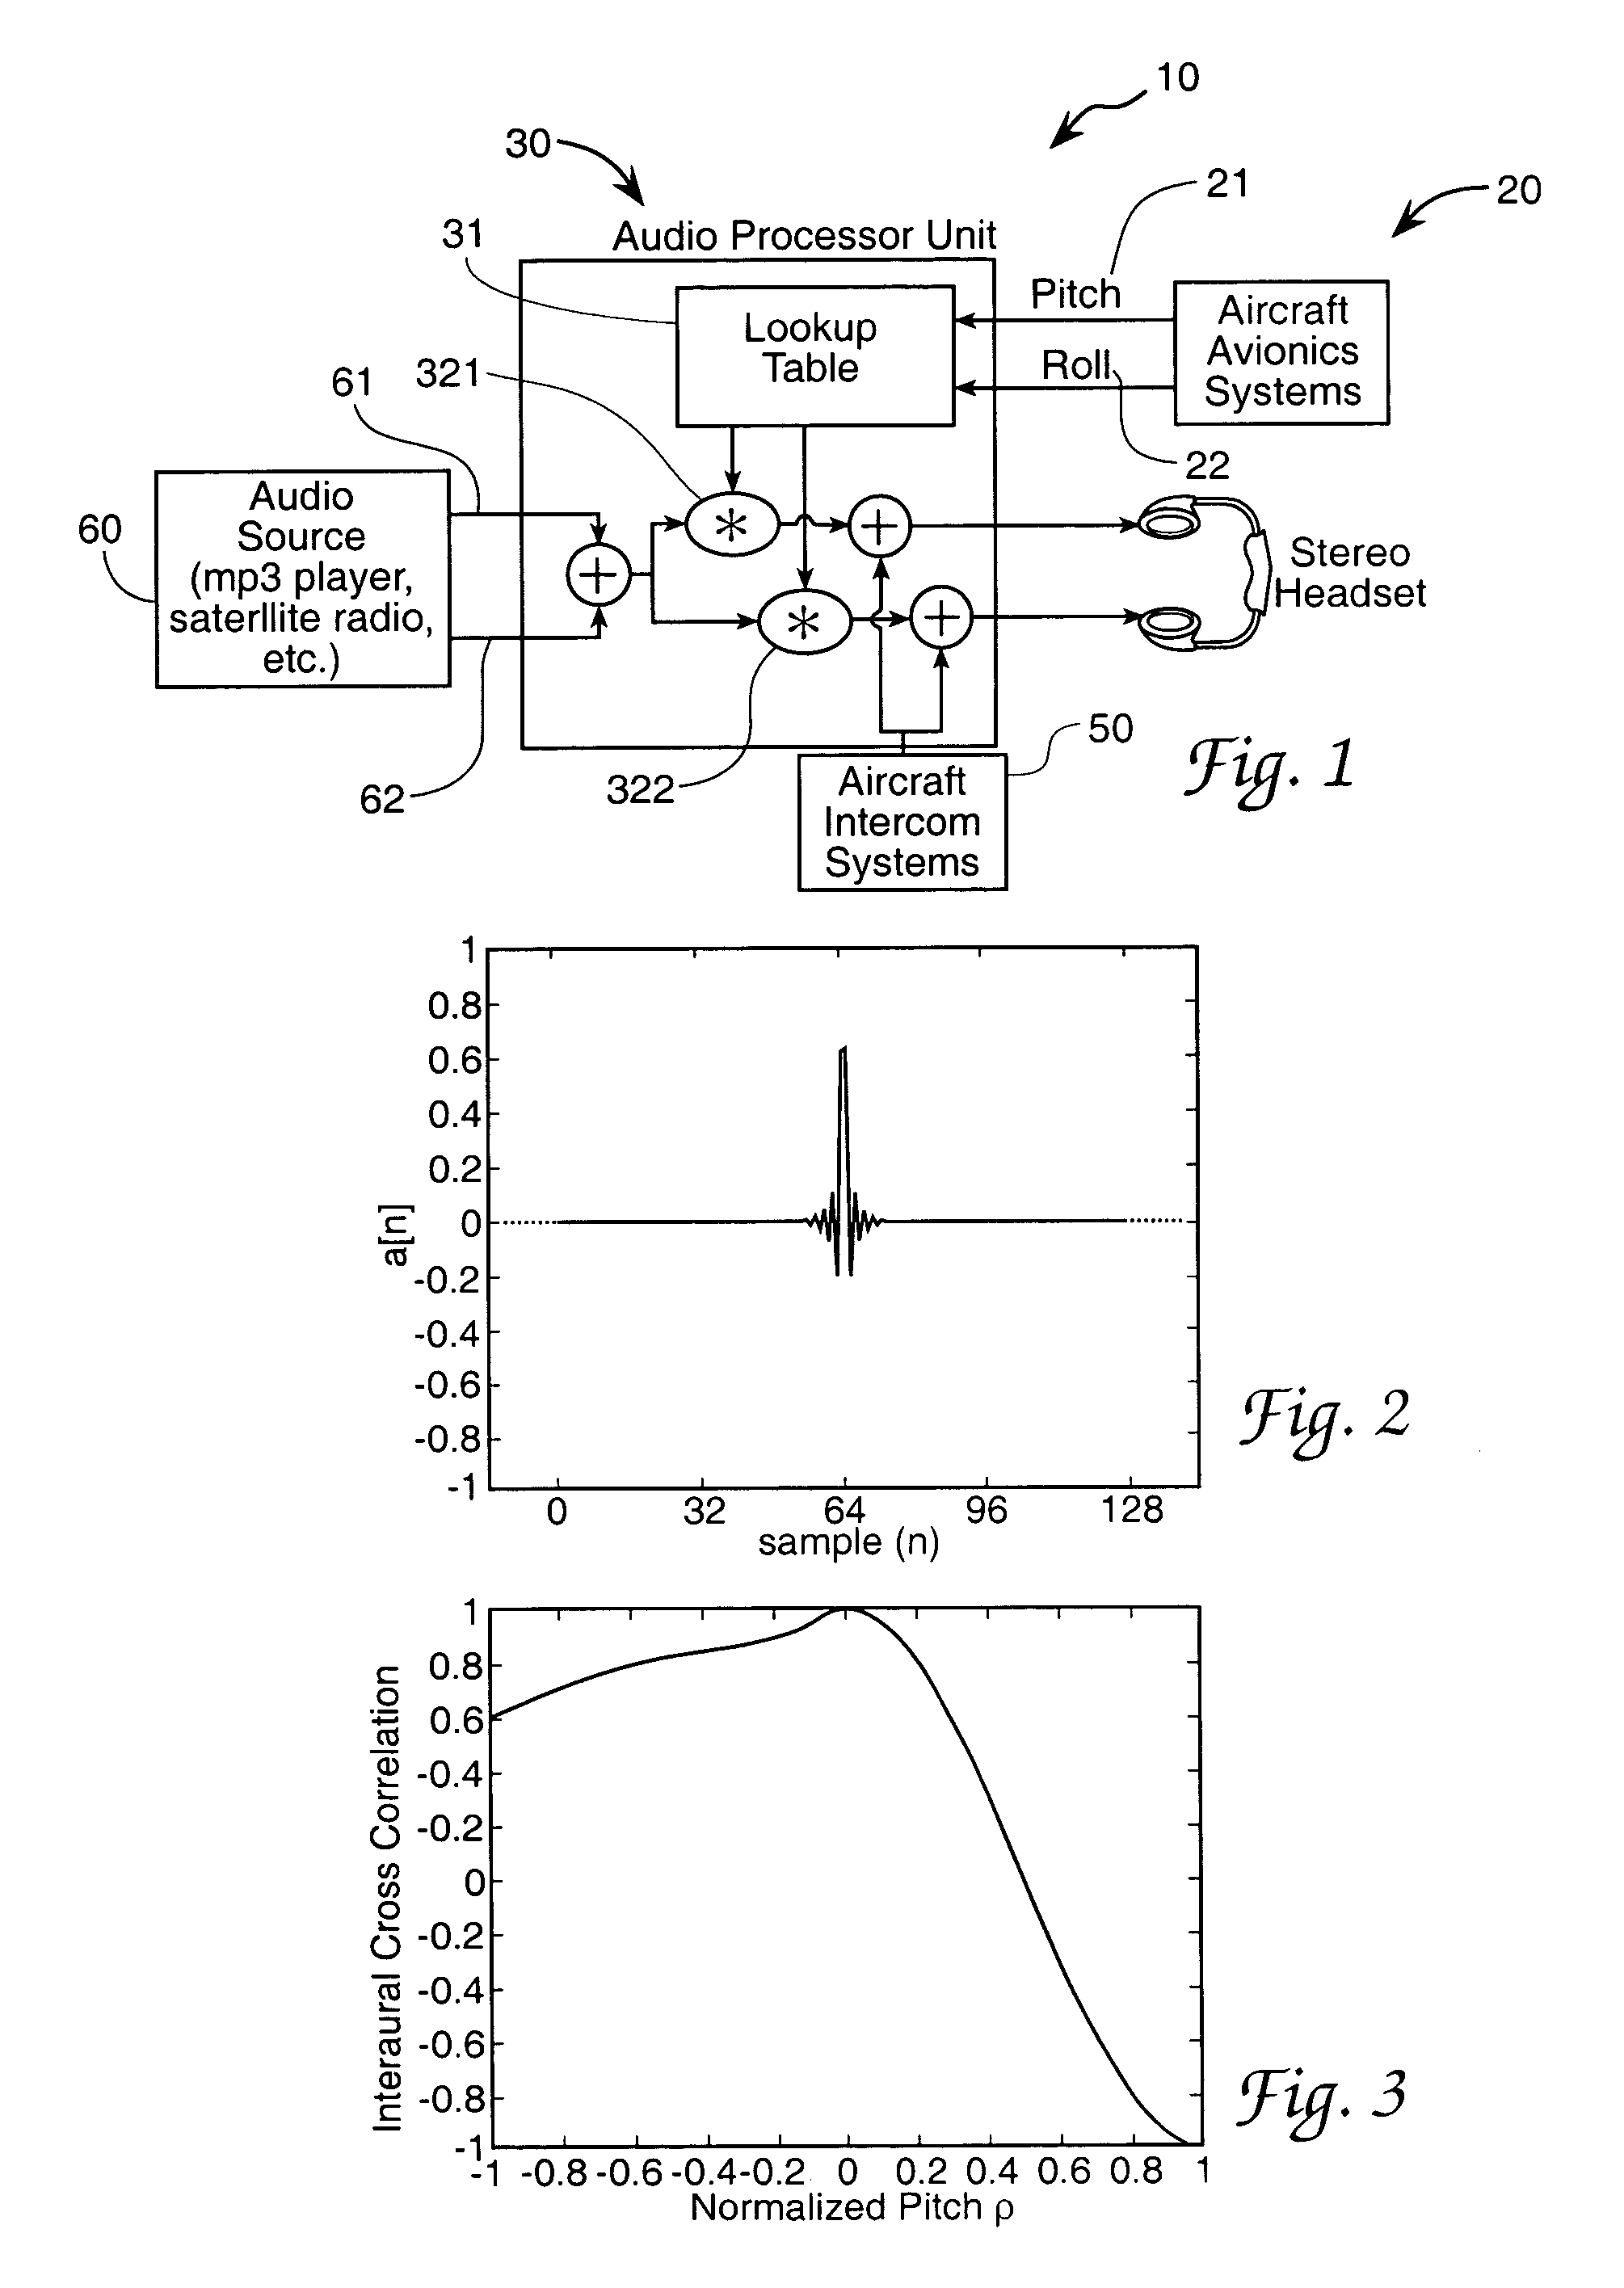 Auditory attitude indicator with pilot-selected audio signals